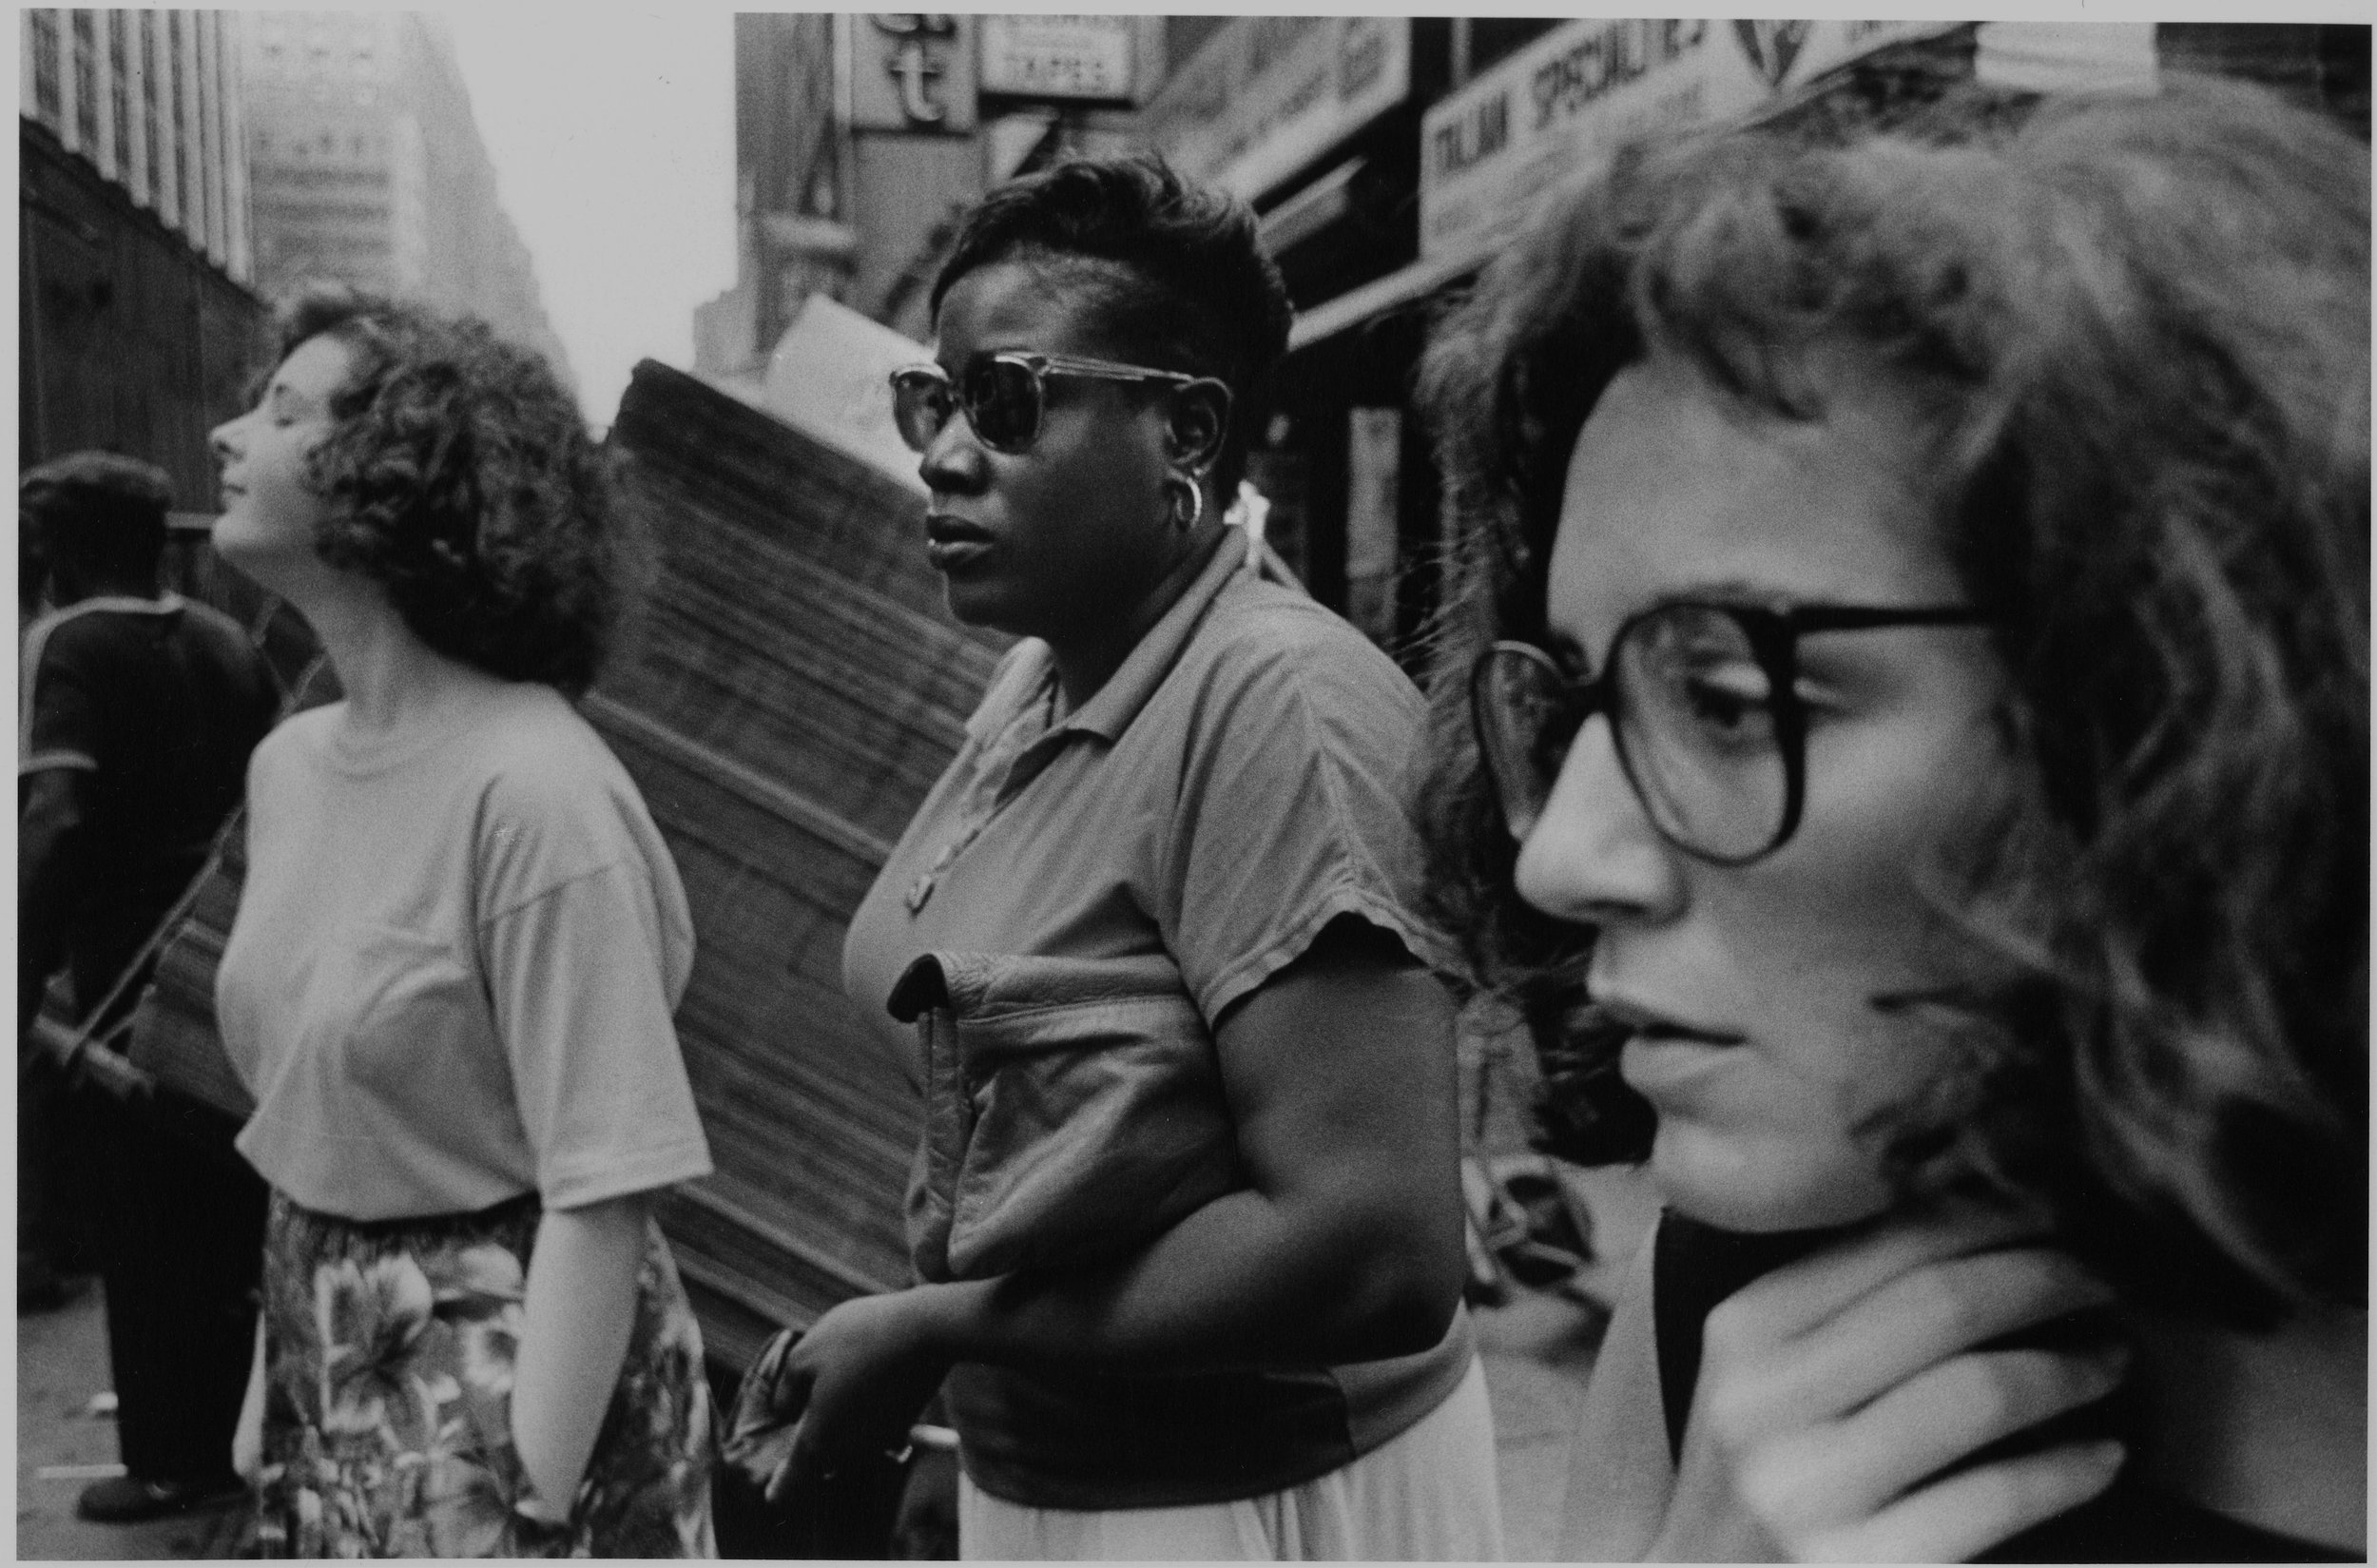 three women in profile, 5th ave., mid 1980’s